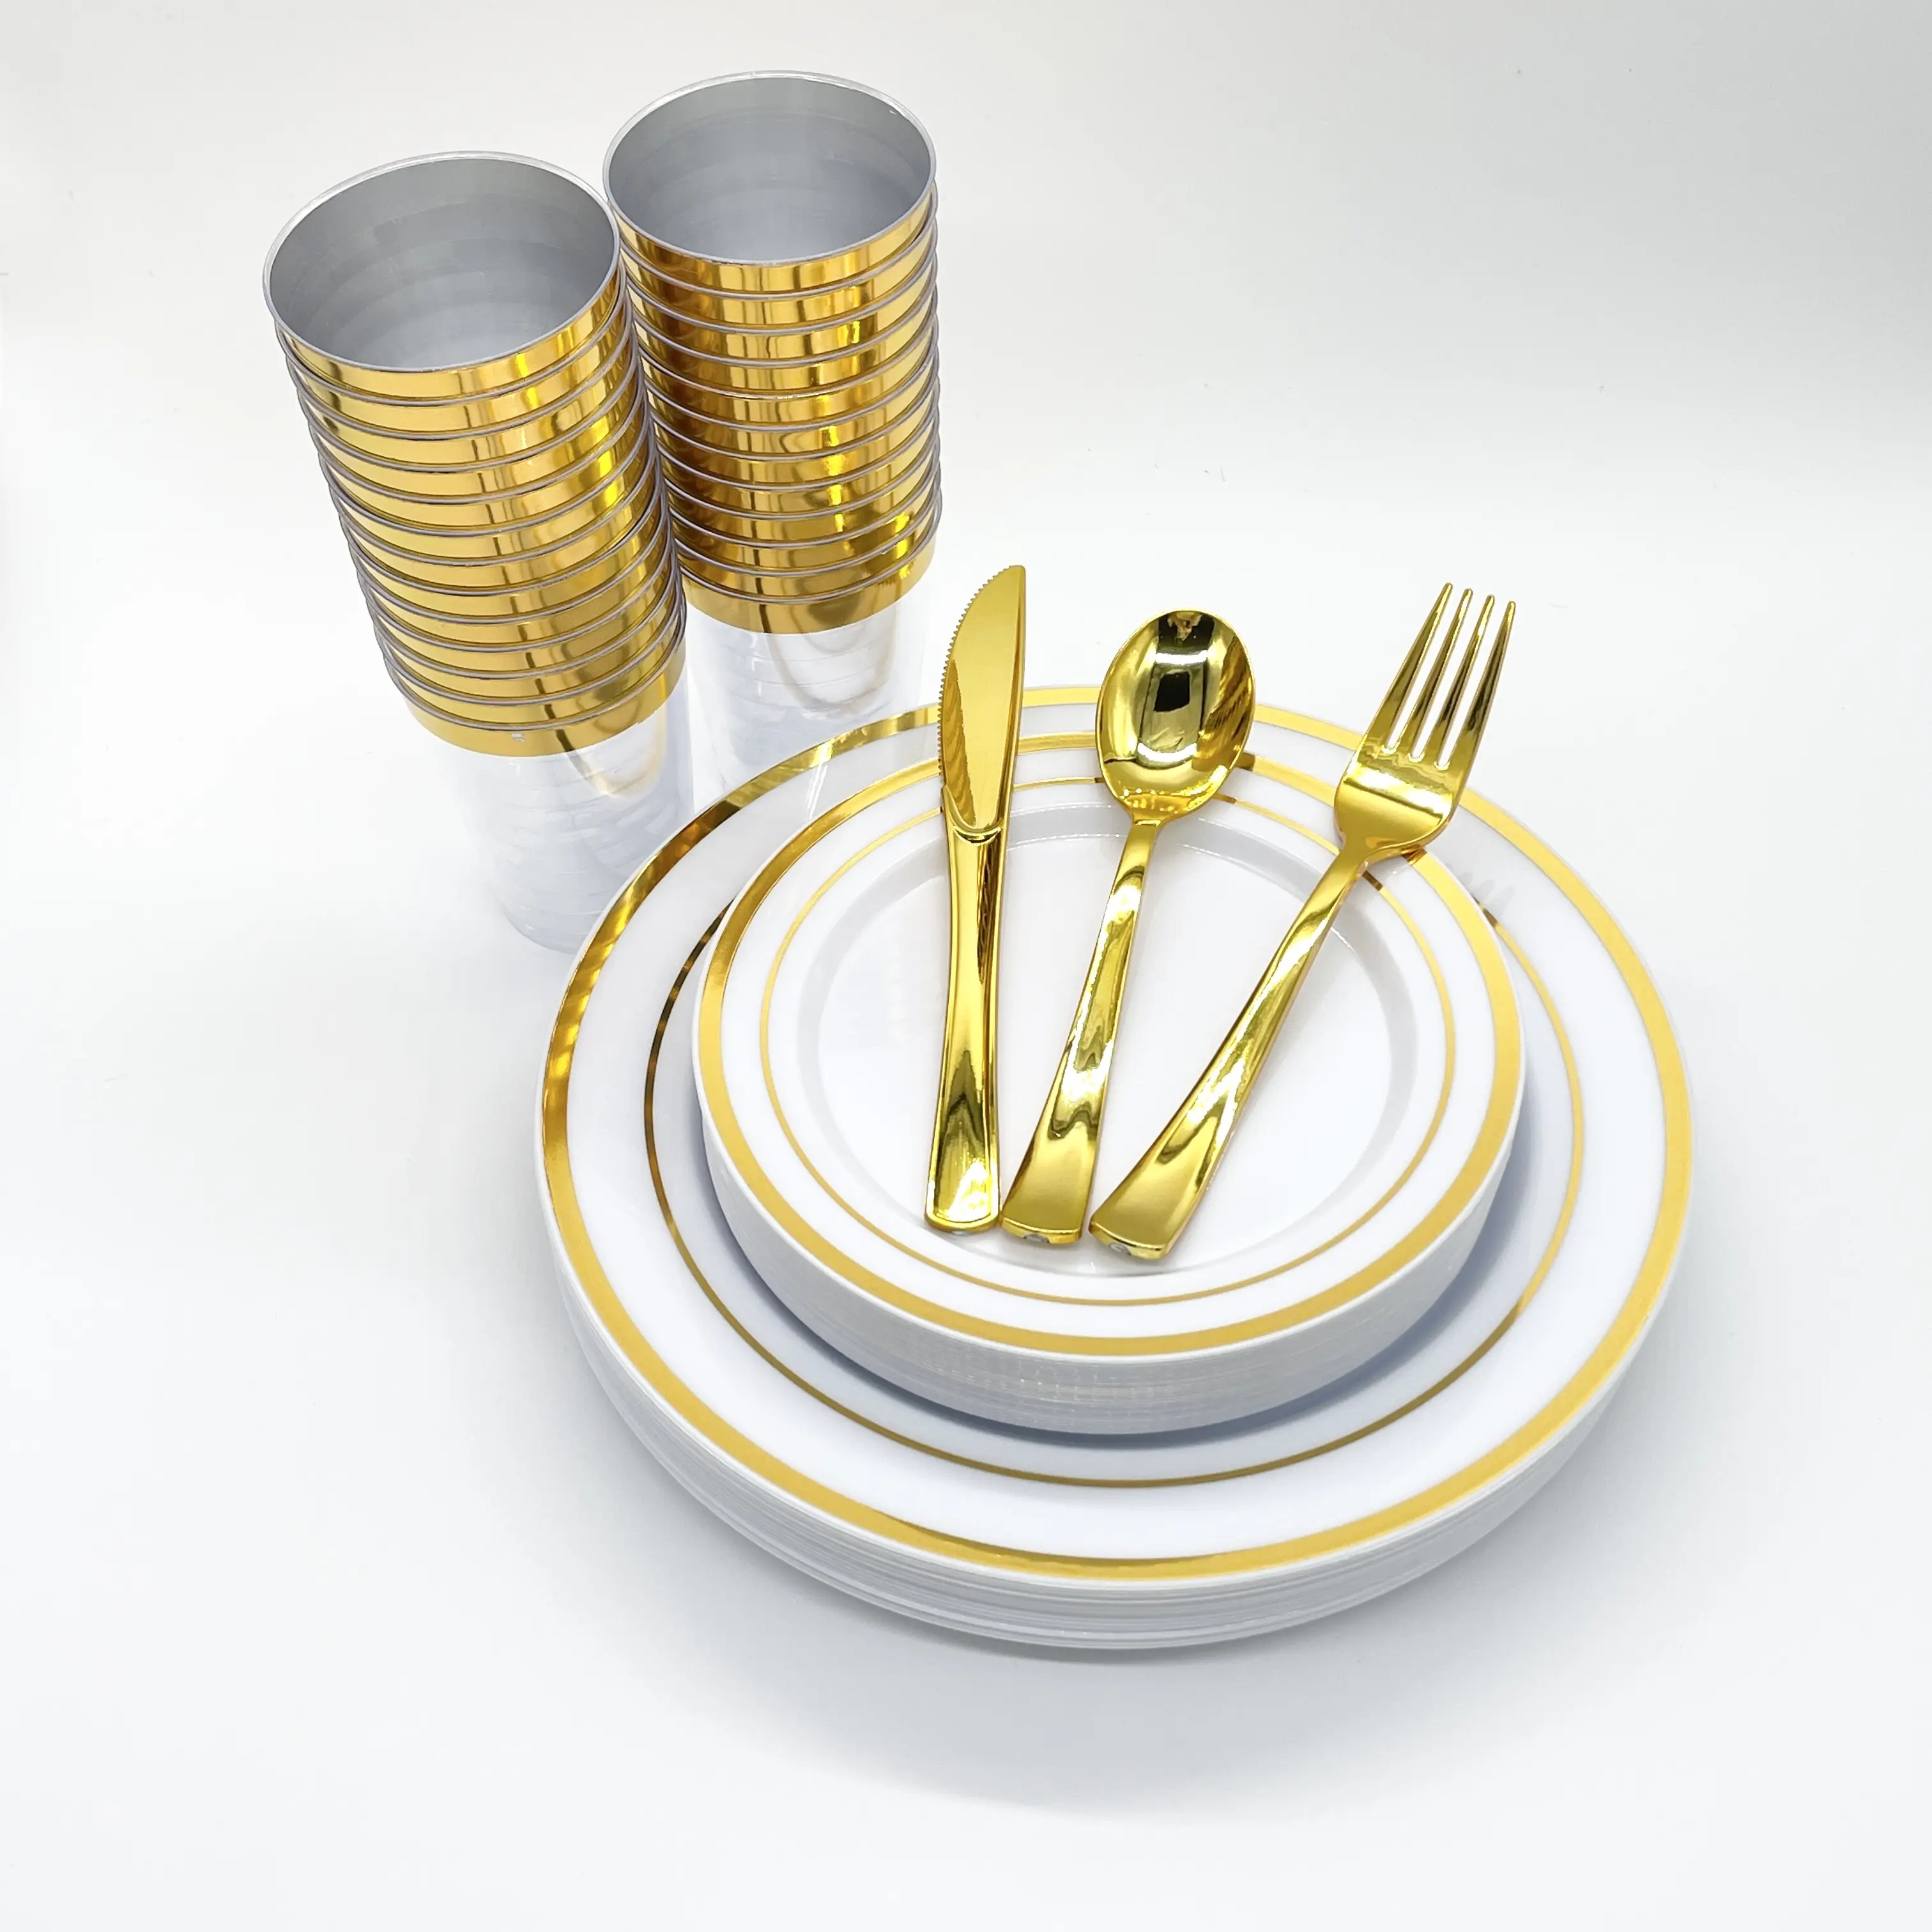 Hot Selling 7" 10" Disposable Gold Rim Plastic Plates Plastic Silverware Dinnerware Sets Plastic Cups for 25 people